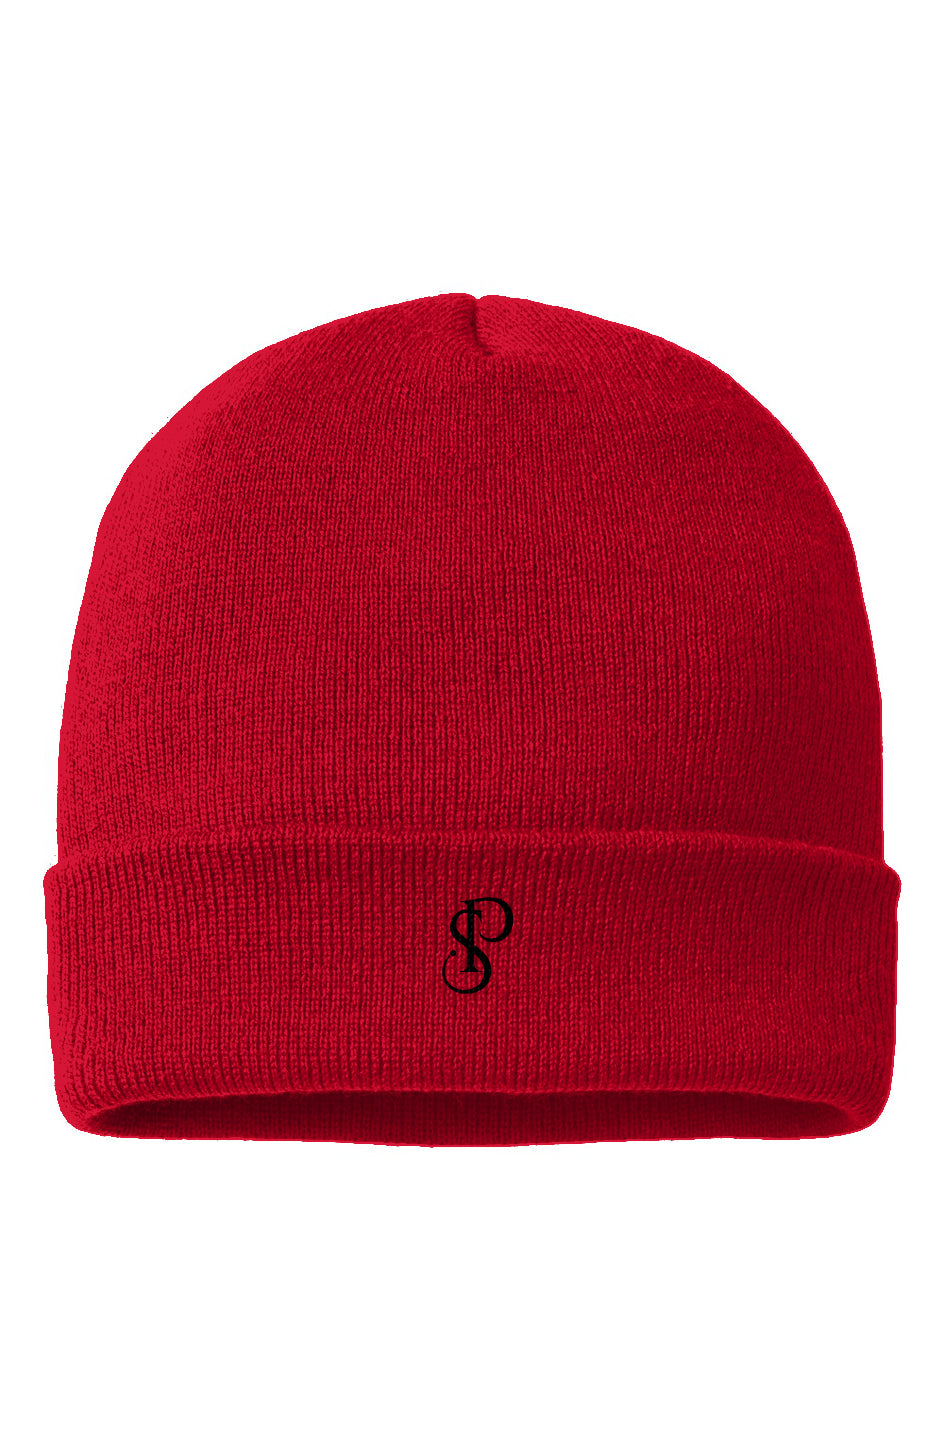 Society’s Product cuffed beanie red